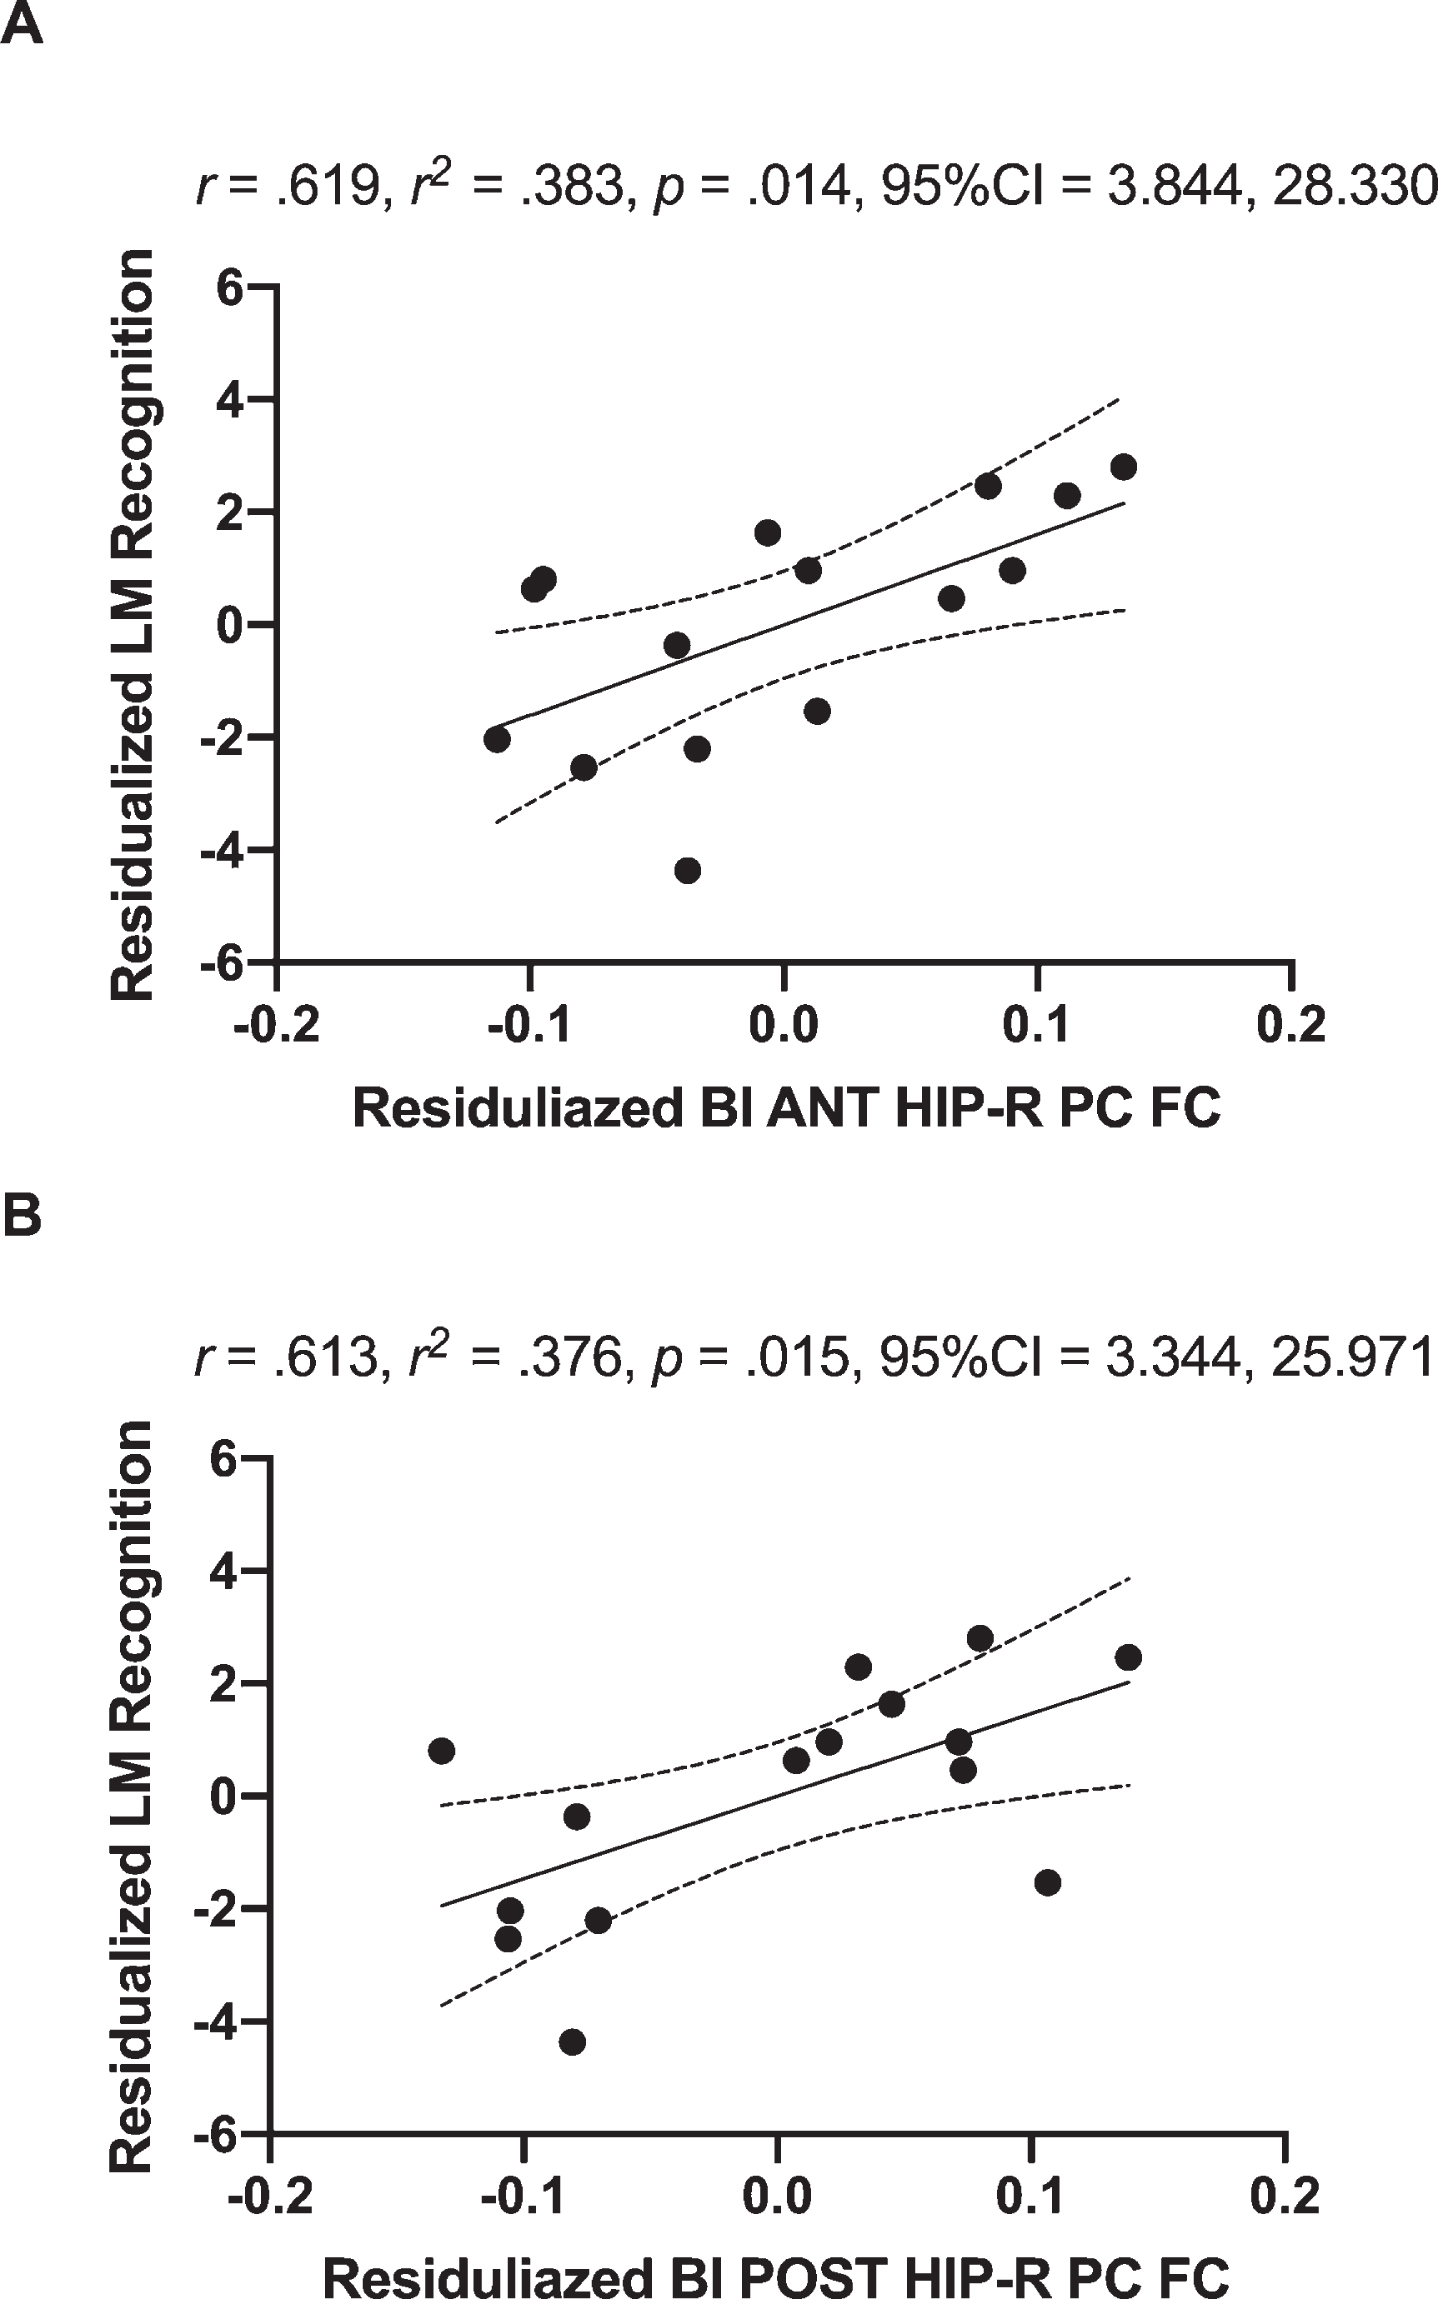 Positive associations of residualized changes in anterior hippocampal-FC (anterior hippocampus and right posterior cingulate; Fig. 2A) and residualized changes in logical memory recognition performance in MCI individuals (A). There was also a positive correlation between of residualized changes in posterior hippocampal-FC (posterior hippocampus and right posterior cingulate; Fig. 2B) and residualized changes in logical memory recognition performance in MCI individuals (B). Dotted curves indicate confidence interval around the mean. CI, 95%confidence interval; BI, bilateral; ANT, anterior; POST, posterior; HIP, hippocampal; R, right; PC, posterior cingulate.